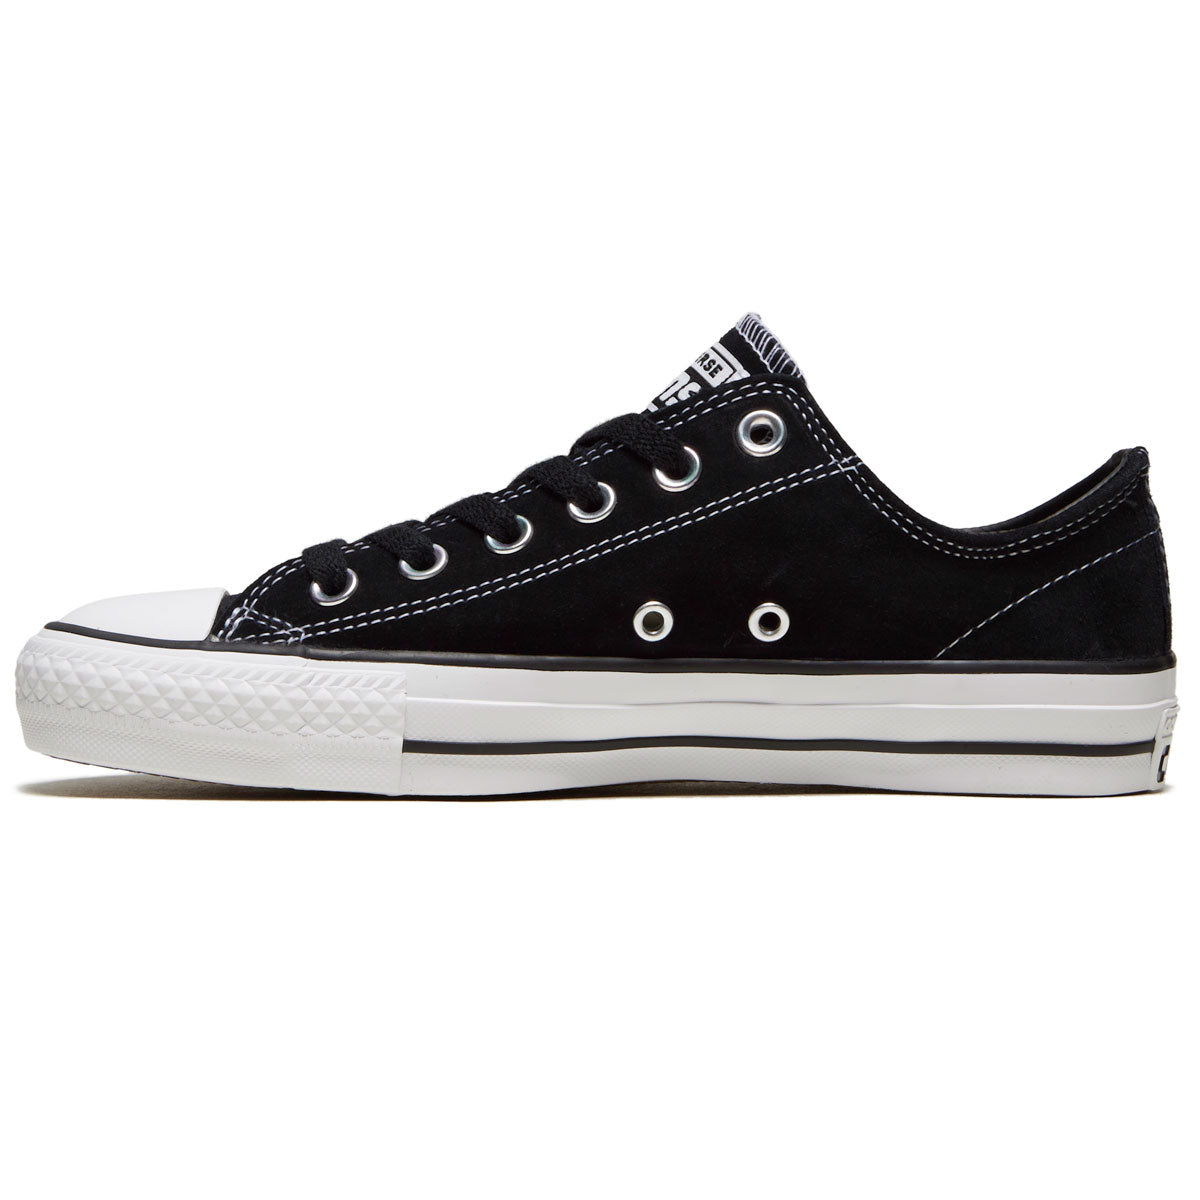 Converse Chuck Taylor All Star Pro Suede Ox Shoes - Black/Black/White – CCS